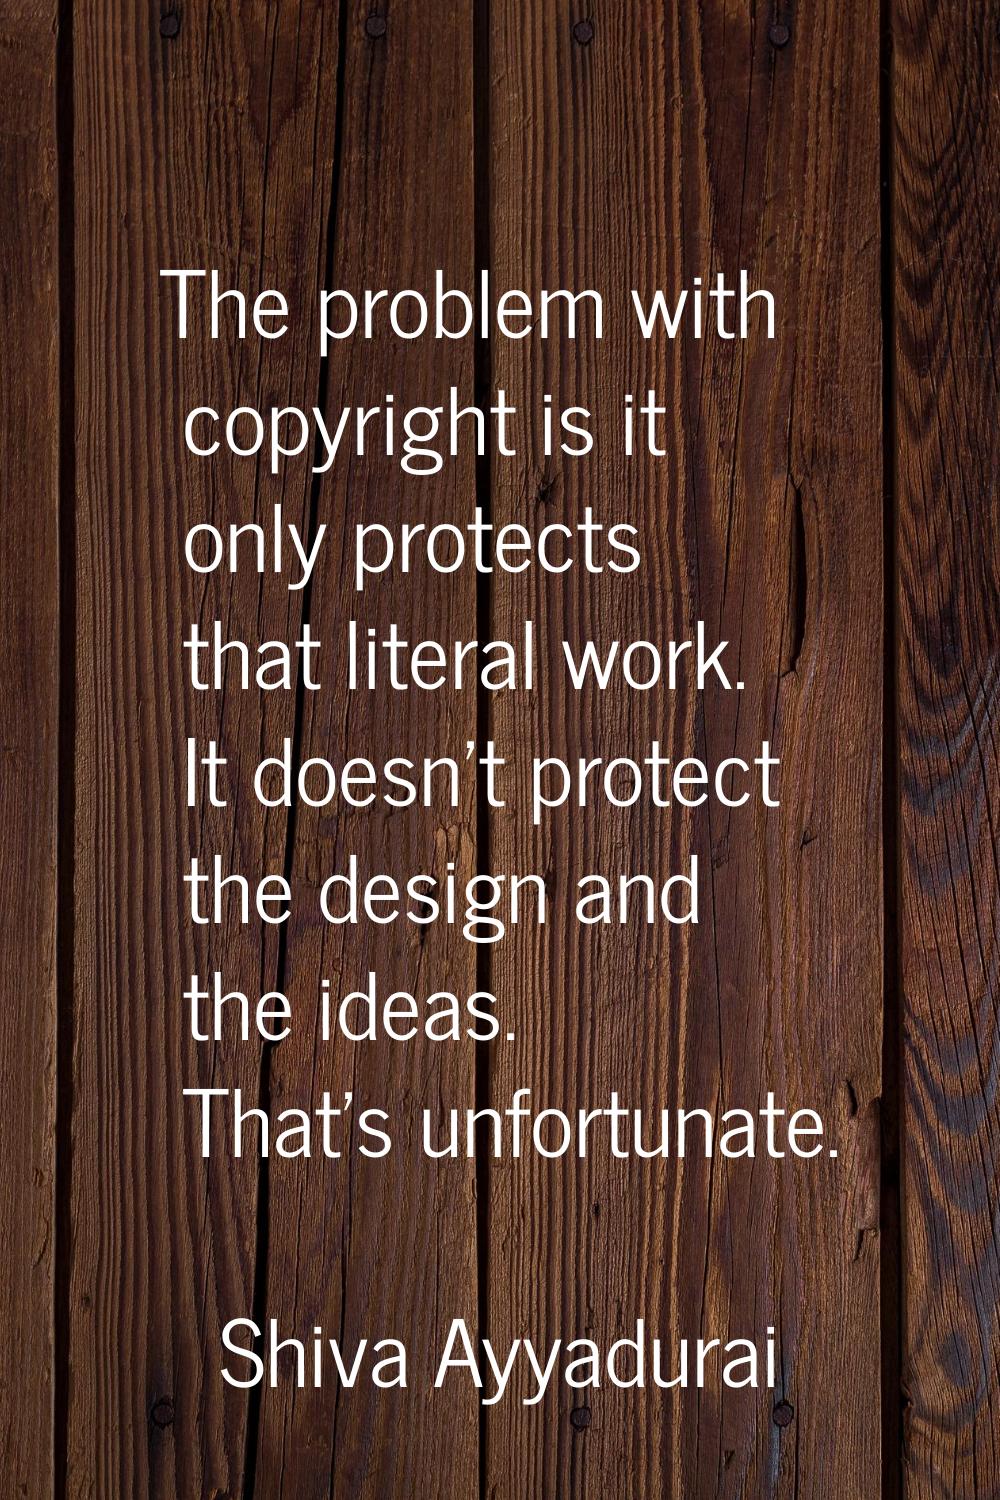 The problem with copyright is it only protects that literal work. It doesn't protect the design and